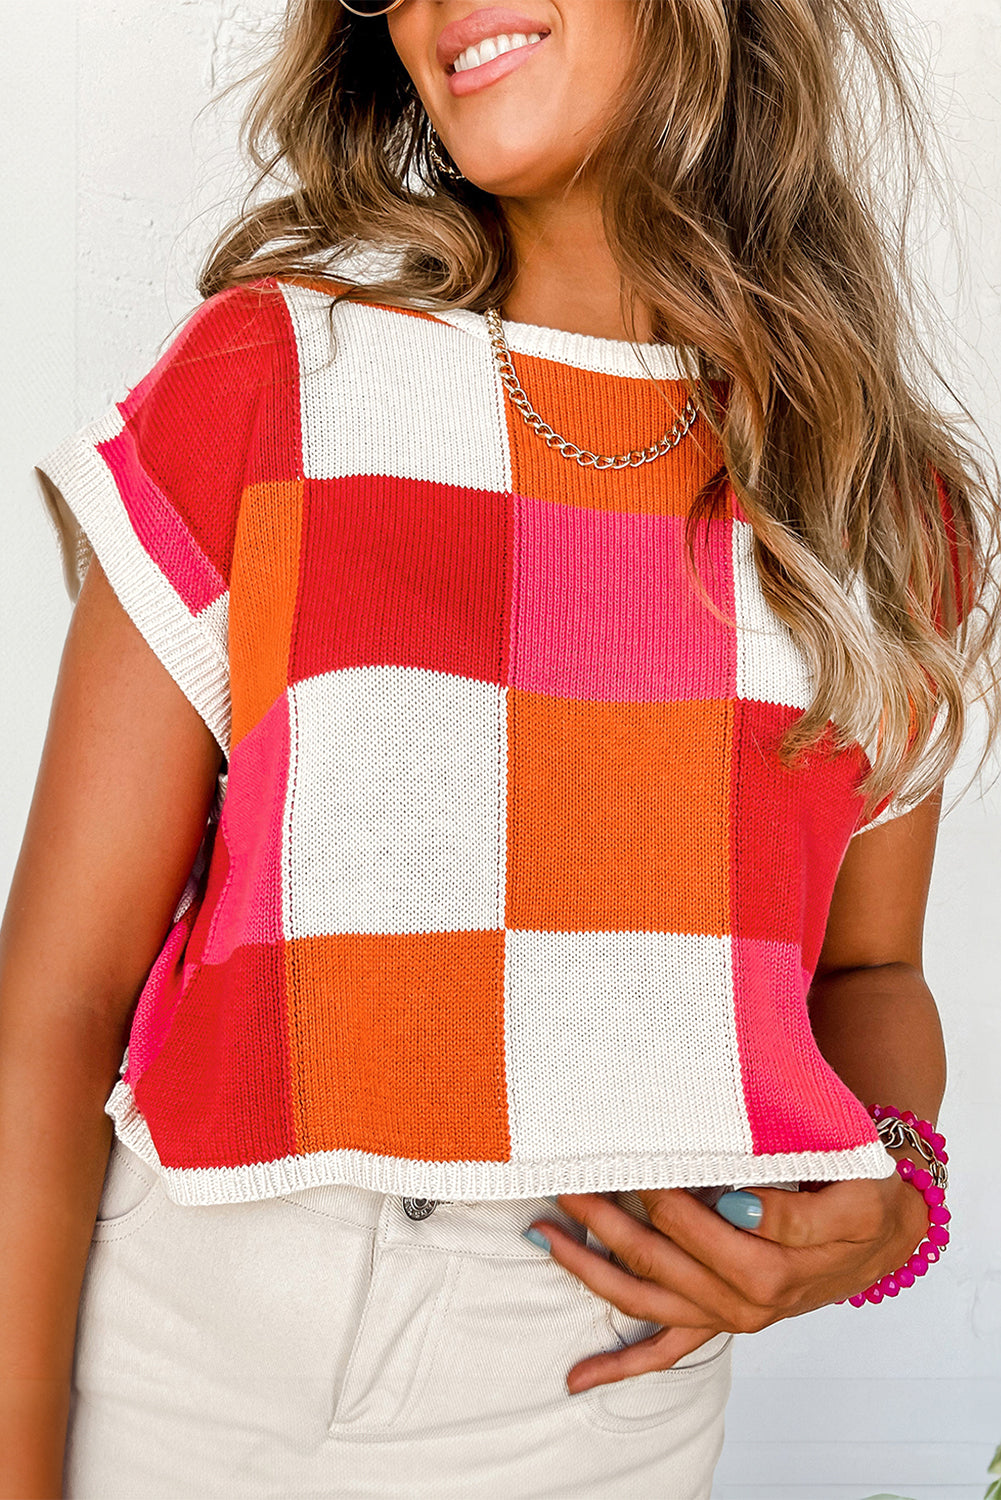 Grapefruit Orange Checkered Color Block Cap Sleeve Knitted Top